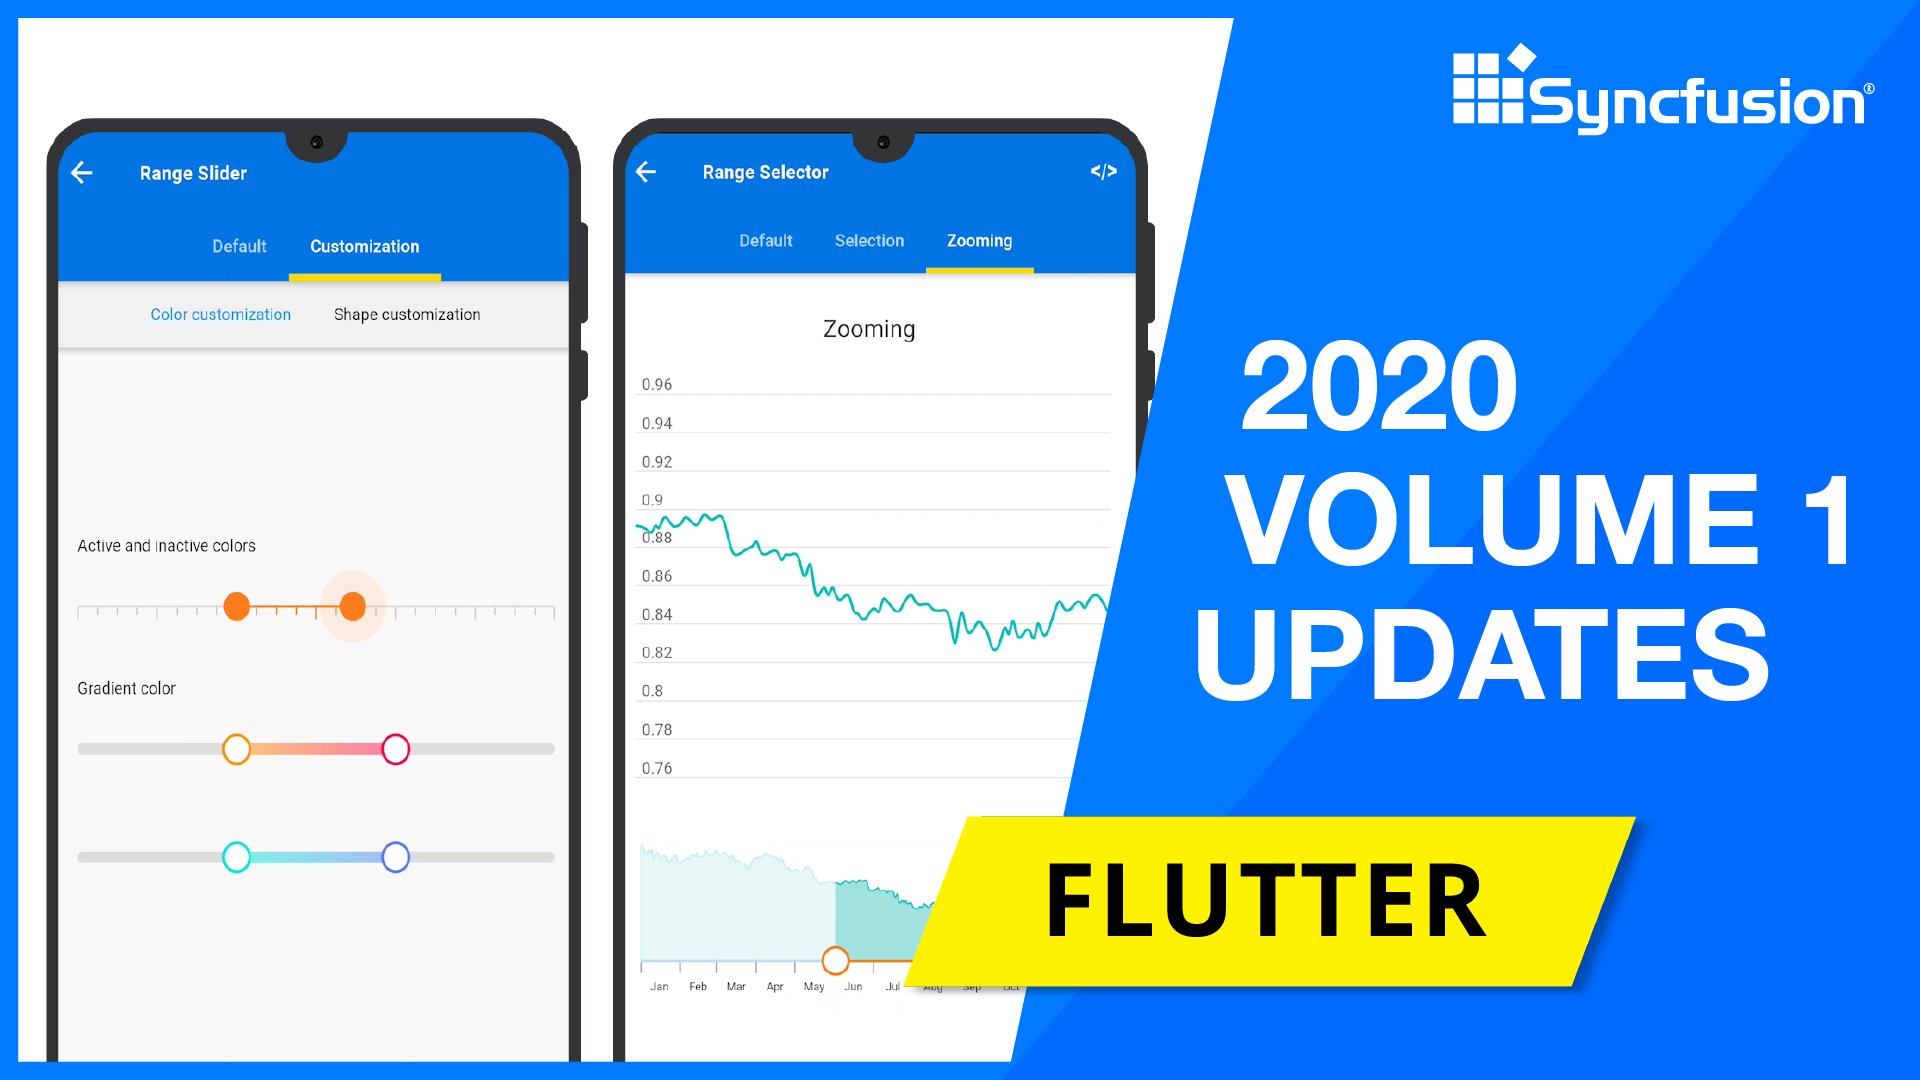 Syncfusion Icymi The Syncfusion Flutter Suite Updates Include A Date Range Picker Range Slider A Barcode Generator And More Flutterdev Mobileappdevelopment Watch The Short Video T Co Ywhf11ugan T Co Uher5ucsf2